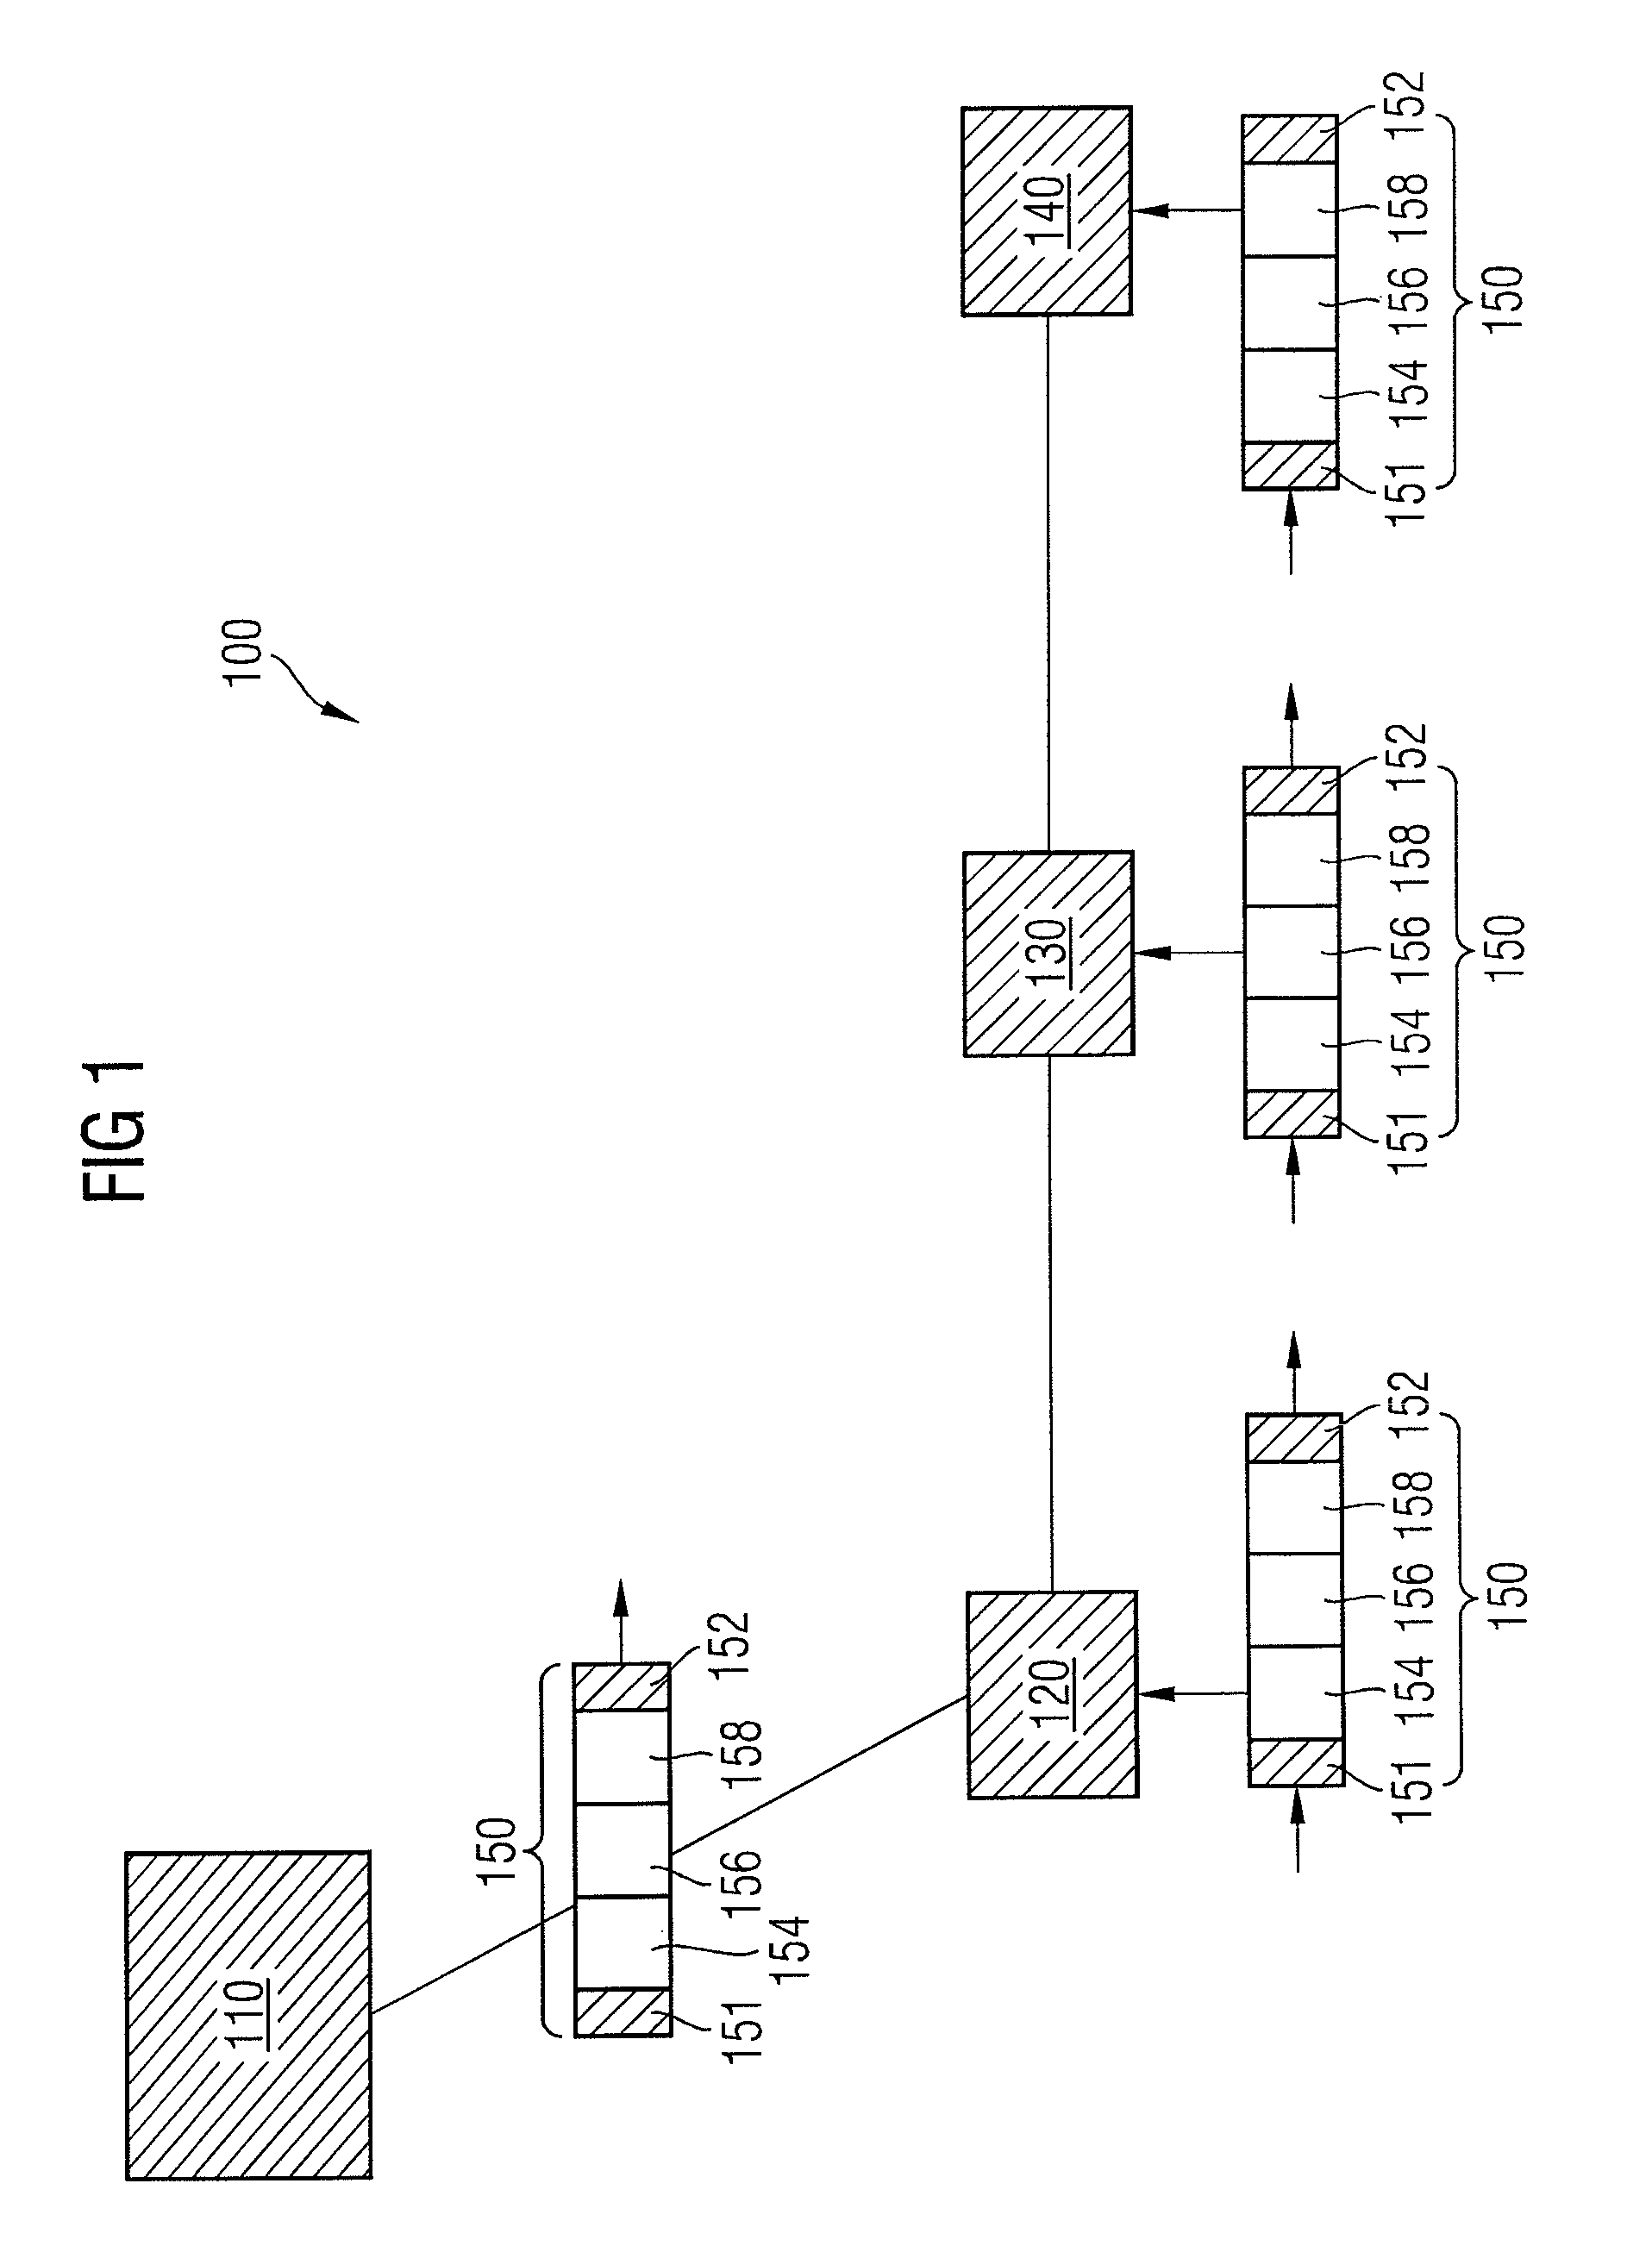 Method for real-time data transmission in a communication network